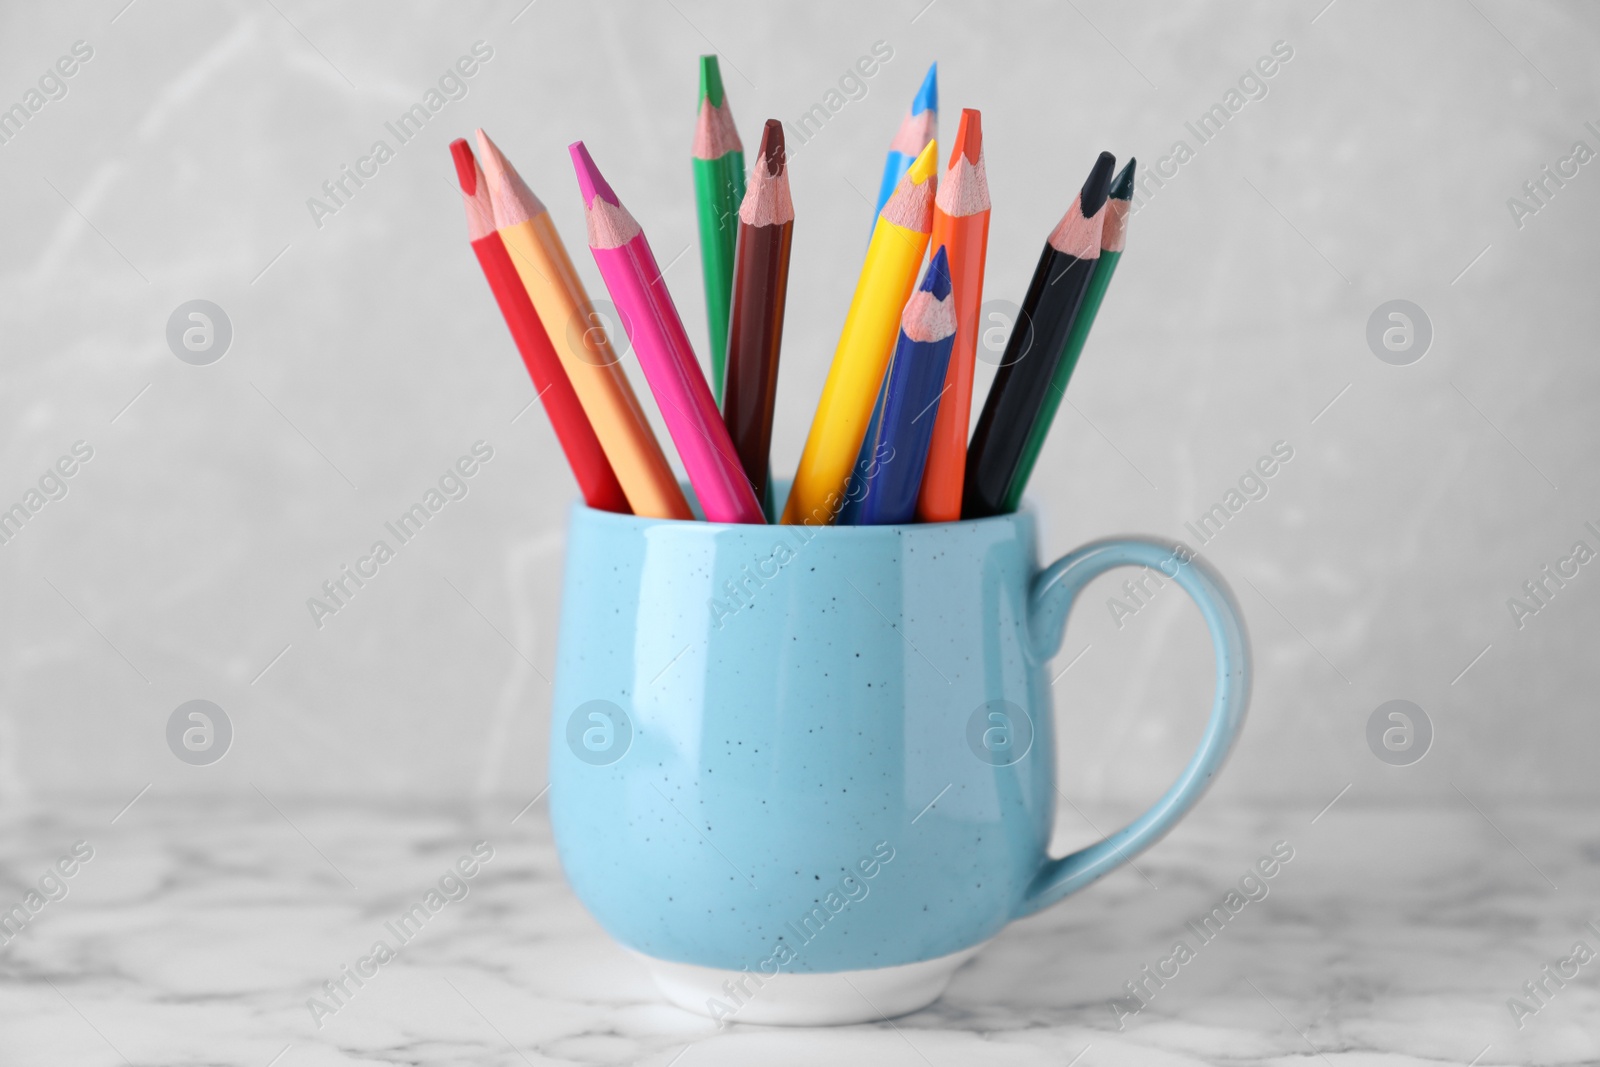 Photo of Colorful pencils in cup on white marble table against grey background